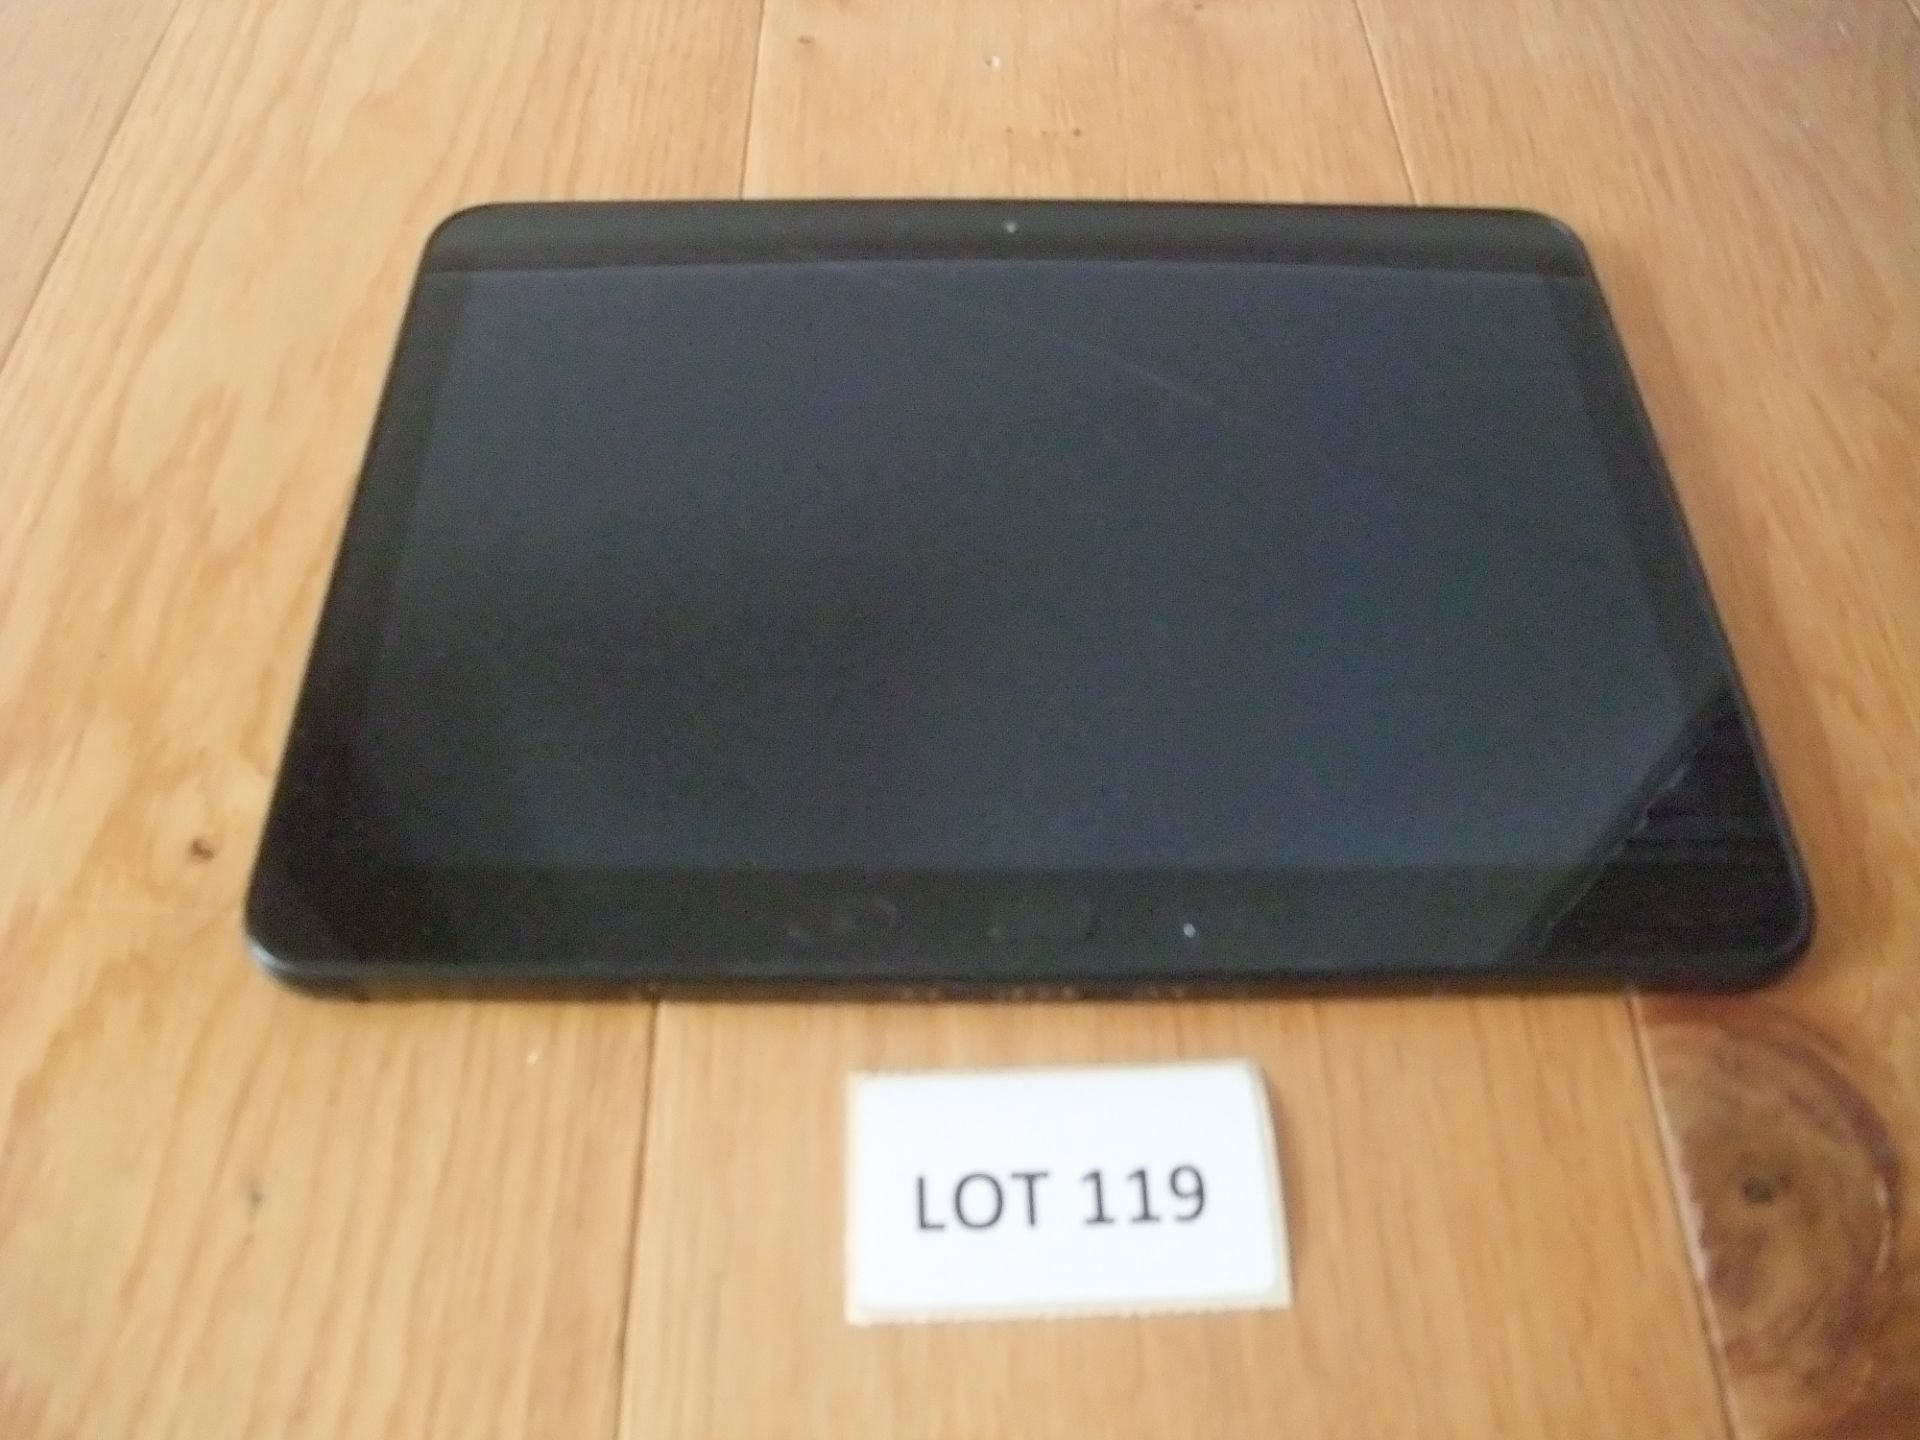 Samsung Galaxy Tab Active Pro SM-T545, 64Gb, Android, with rugedized case - *UNLOCKED* (please